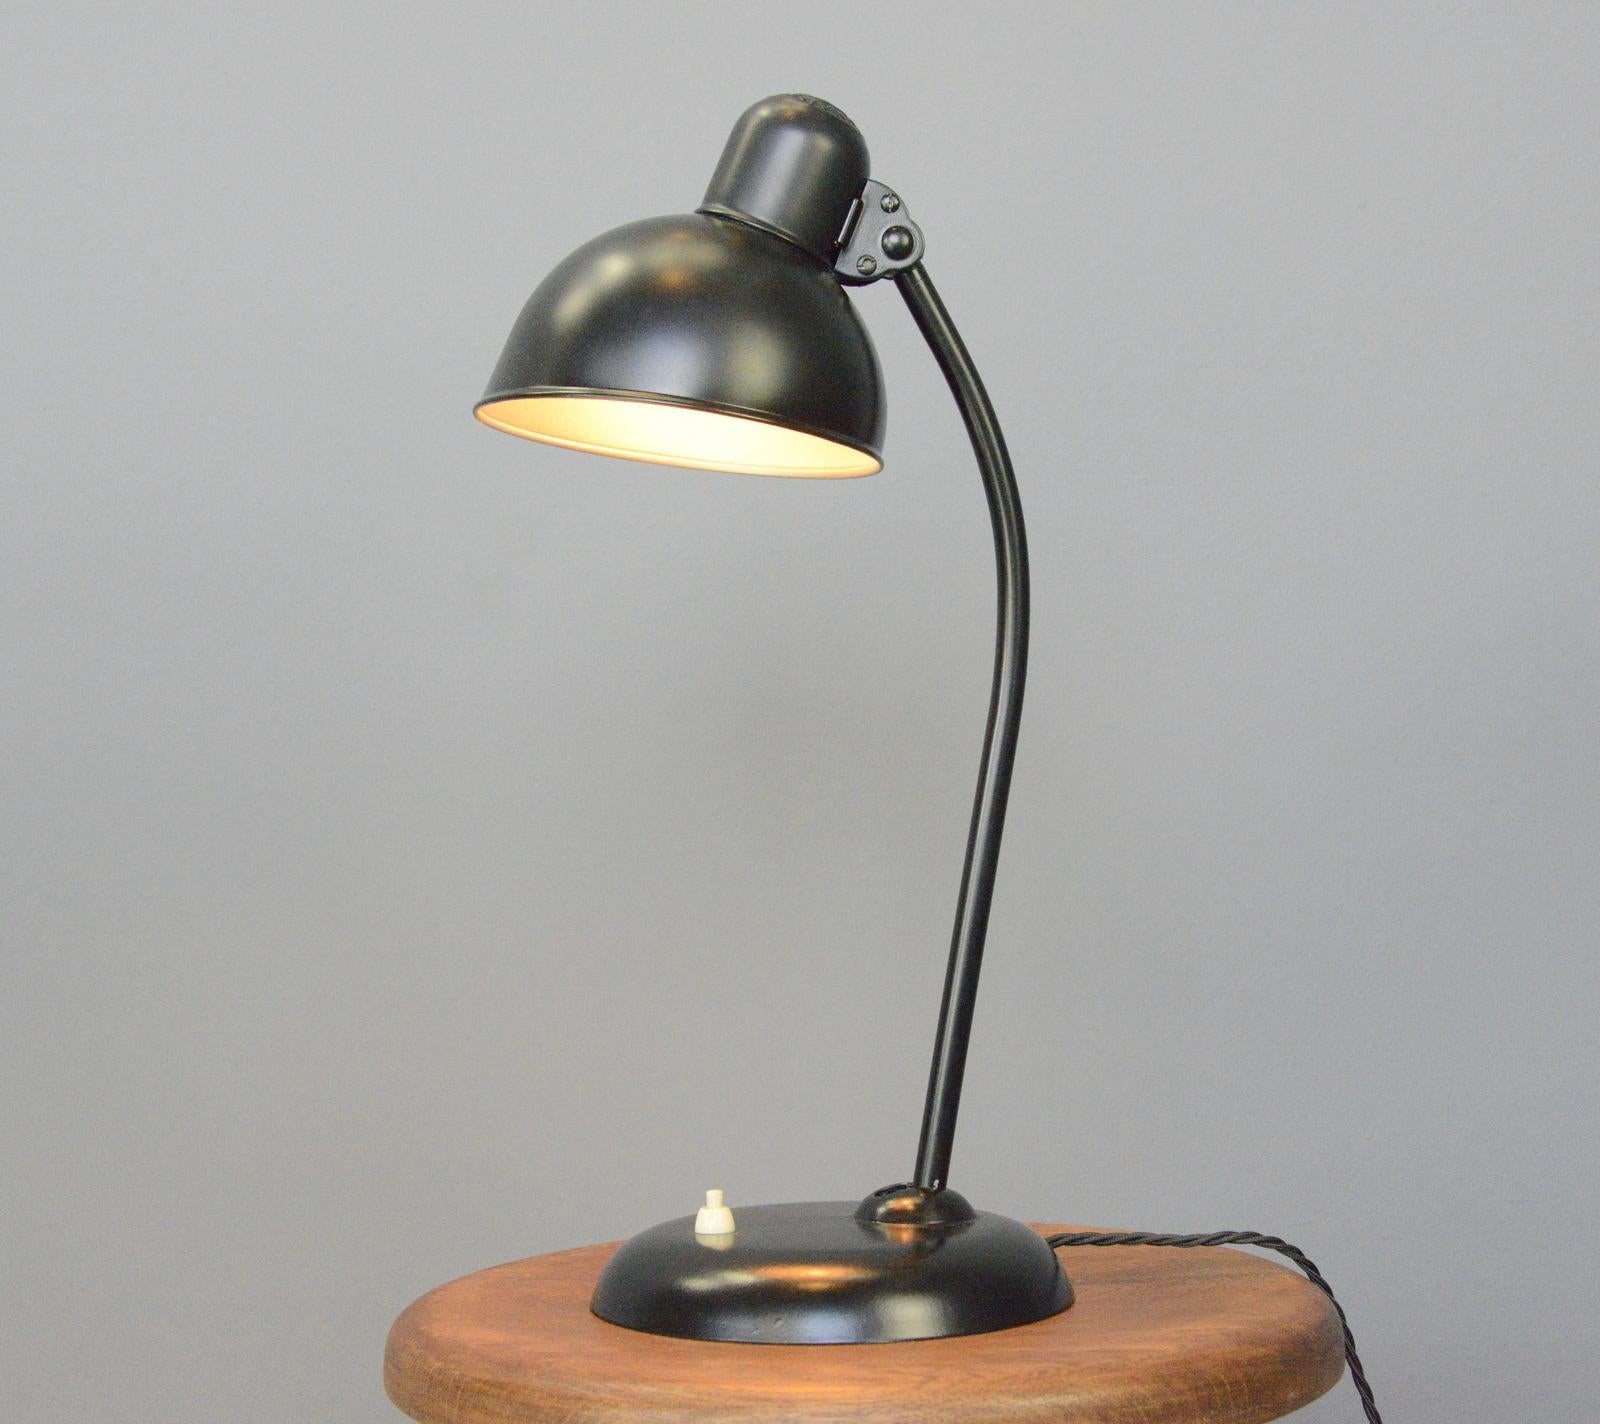 Model 6556 table lamps by Kaiser Idell Circa 1930s.

- Steel shade with relief Kaiser Idell branding
- On/Off switch on the base
- Takes E27 fitting bulbs
- Adjustable arm and shade
- Designed by Christian Dell
- Model 6556 Kaiser Idell
-